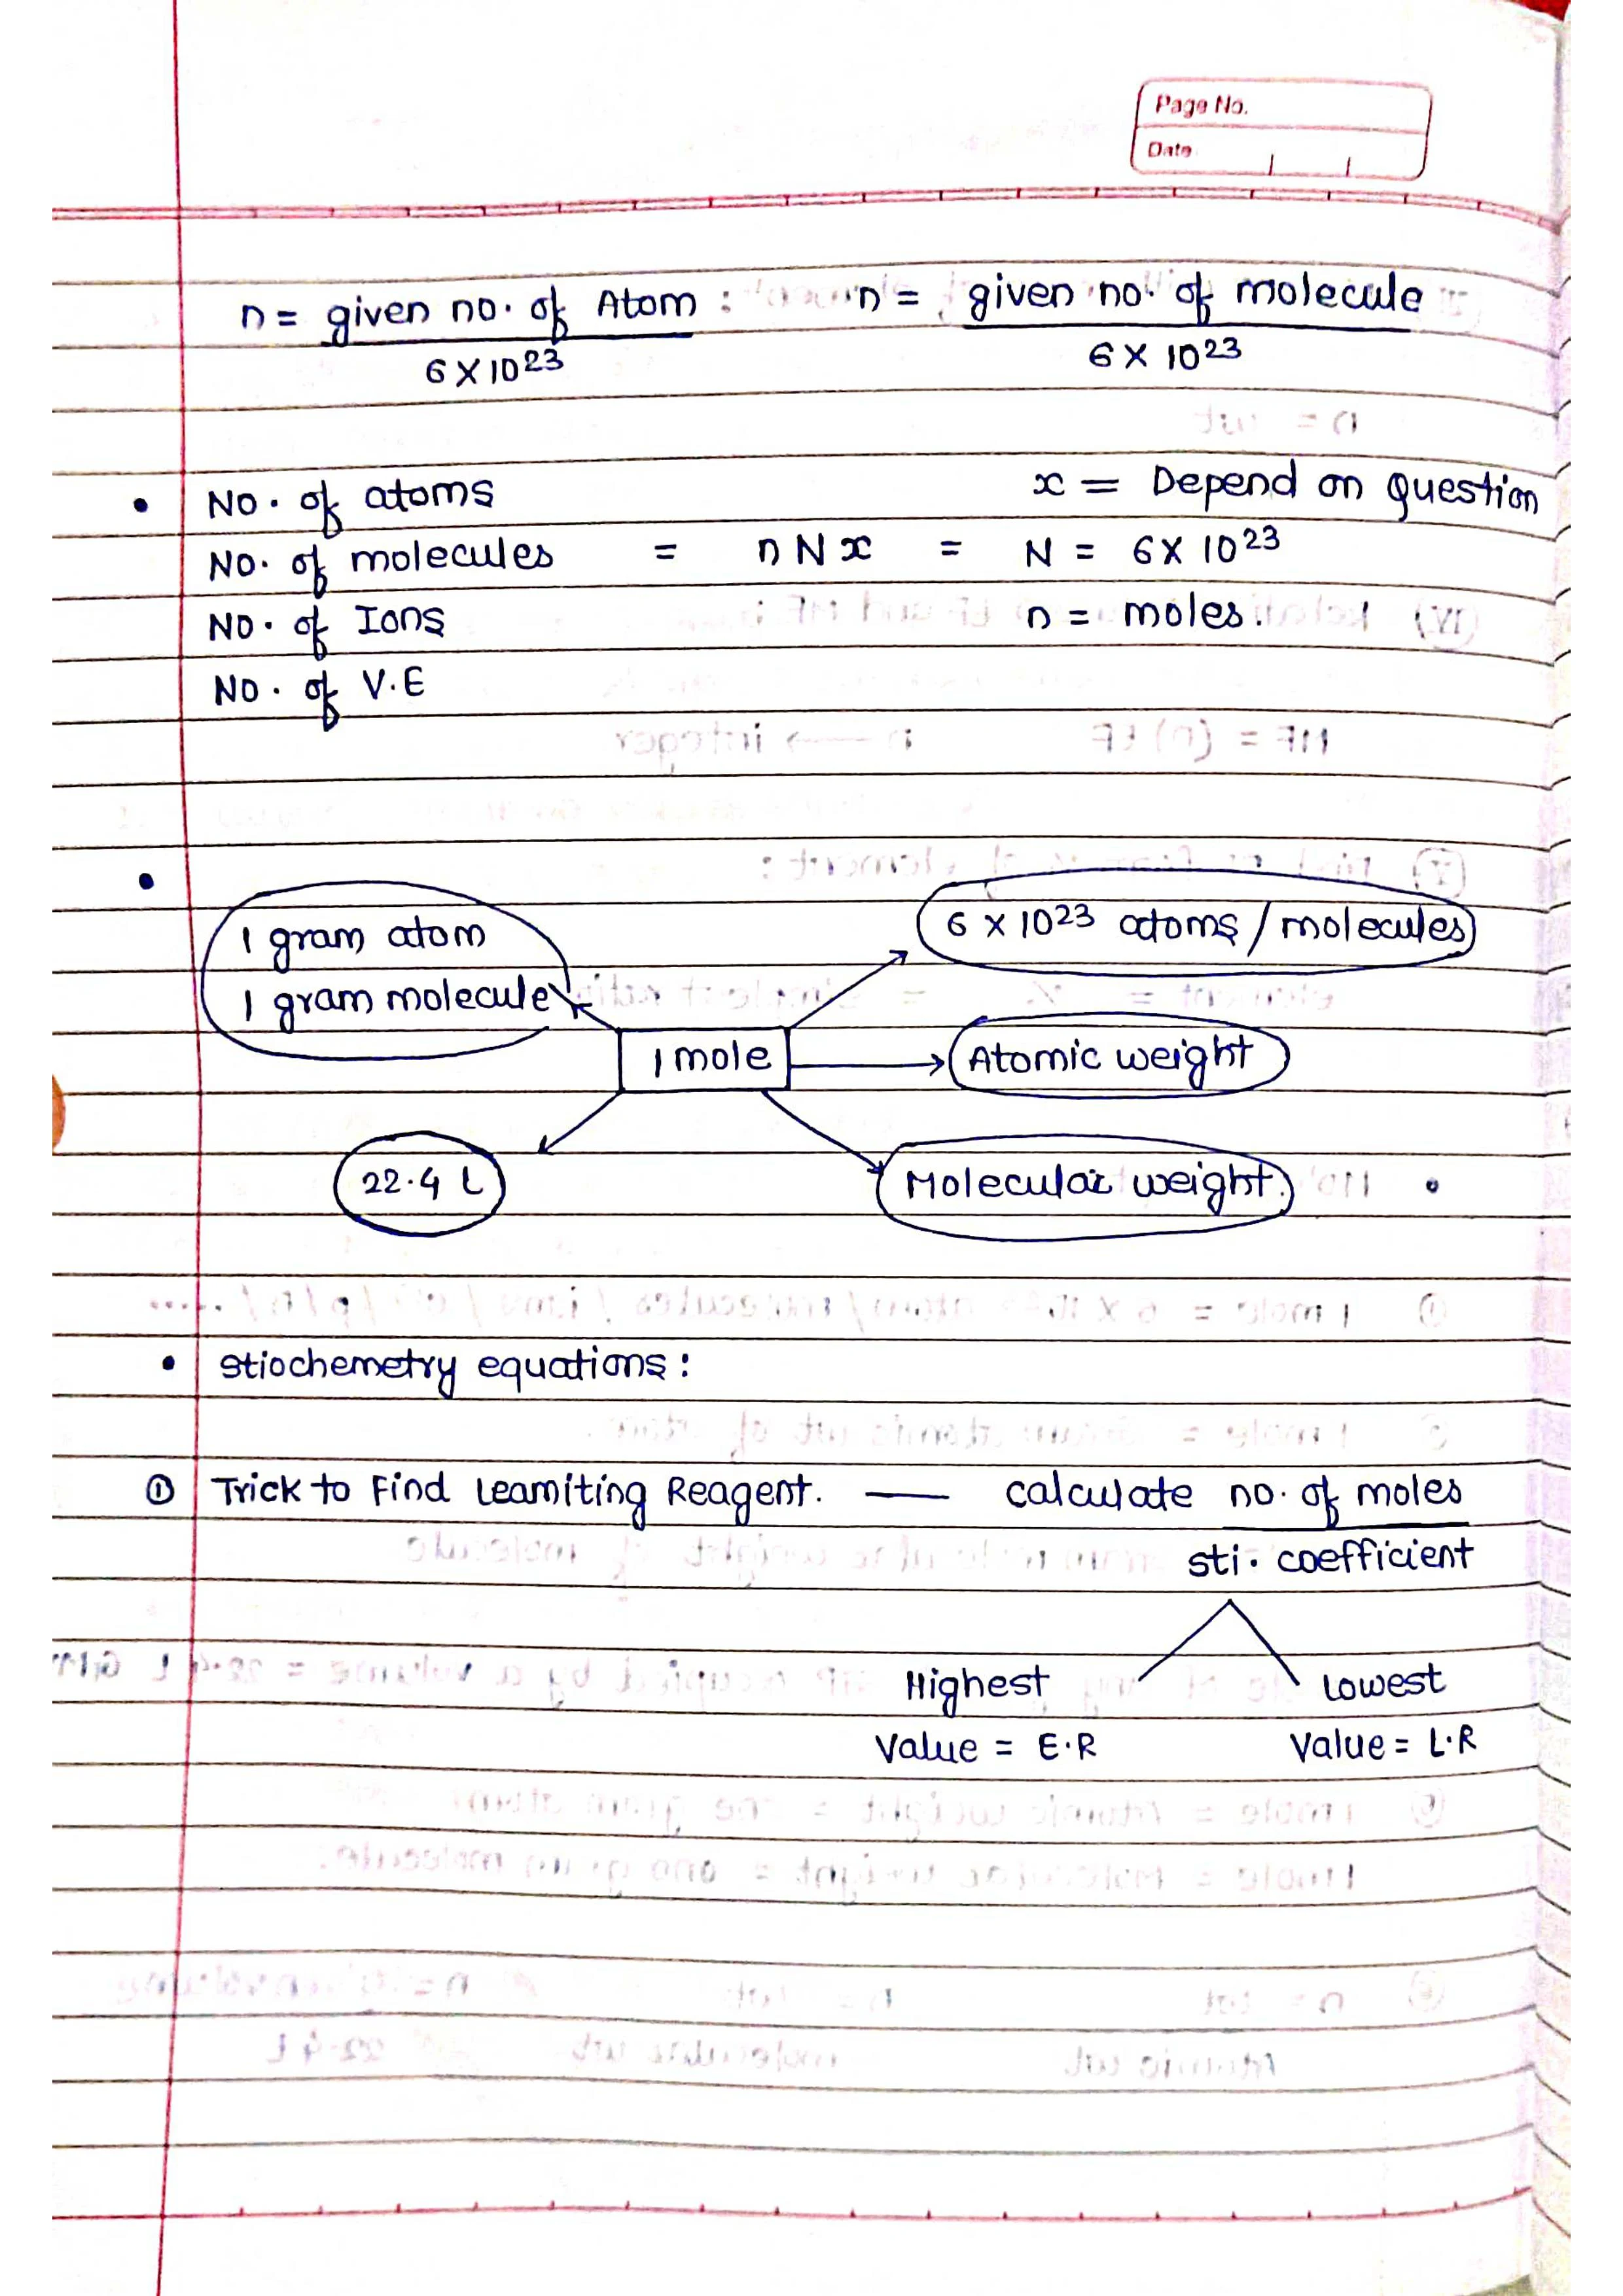 Some Basic Concepts of Chemistry - Short Notes